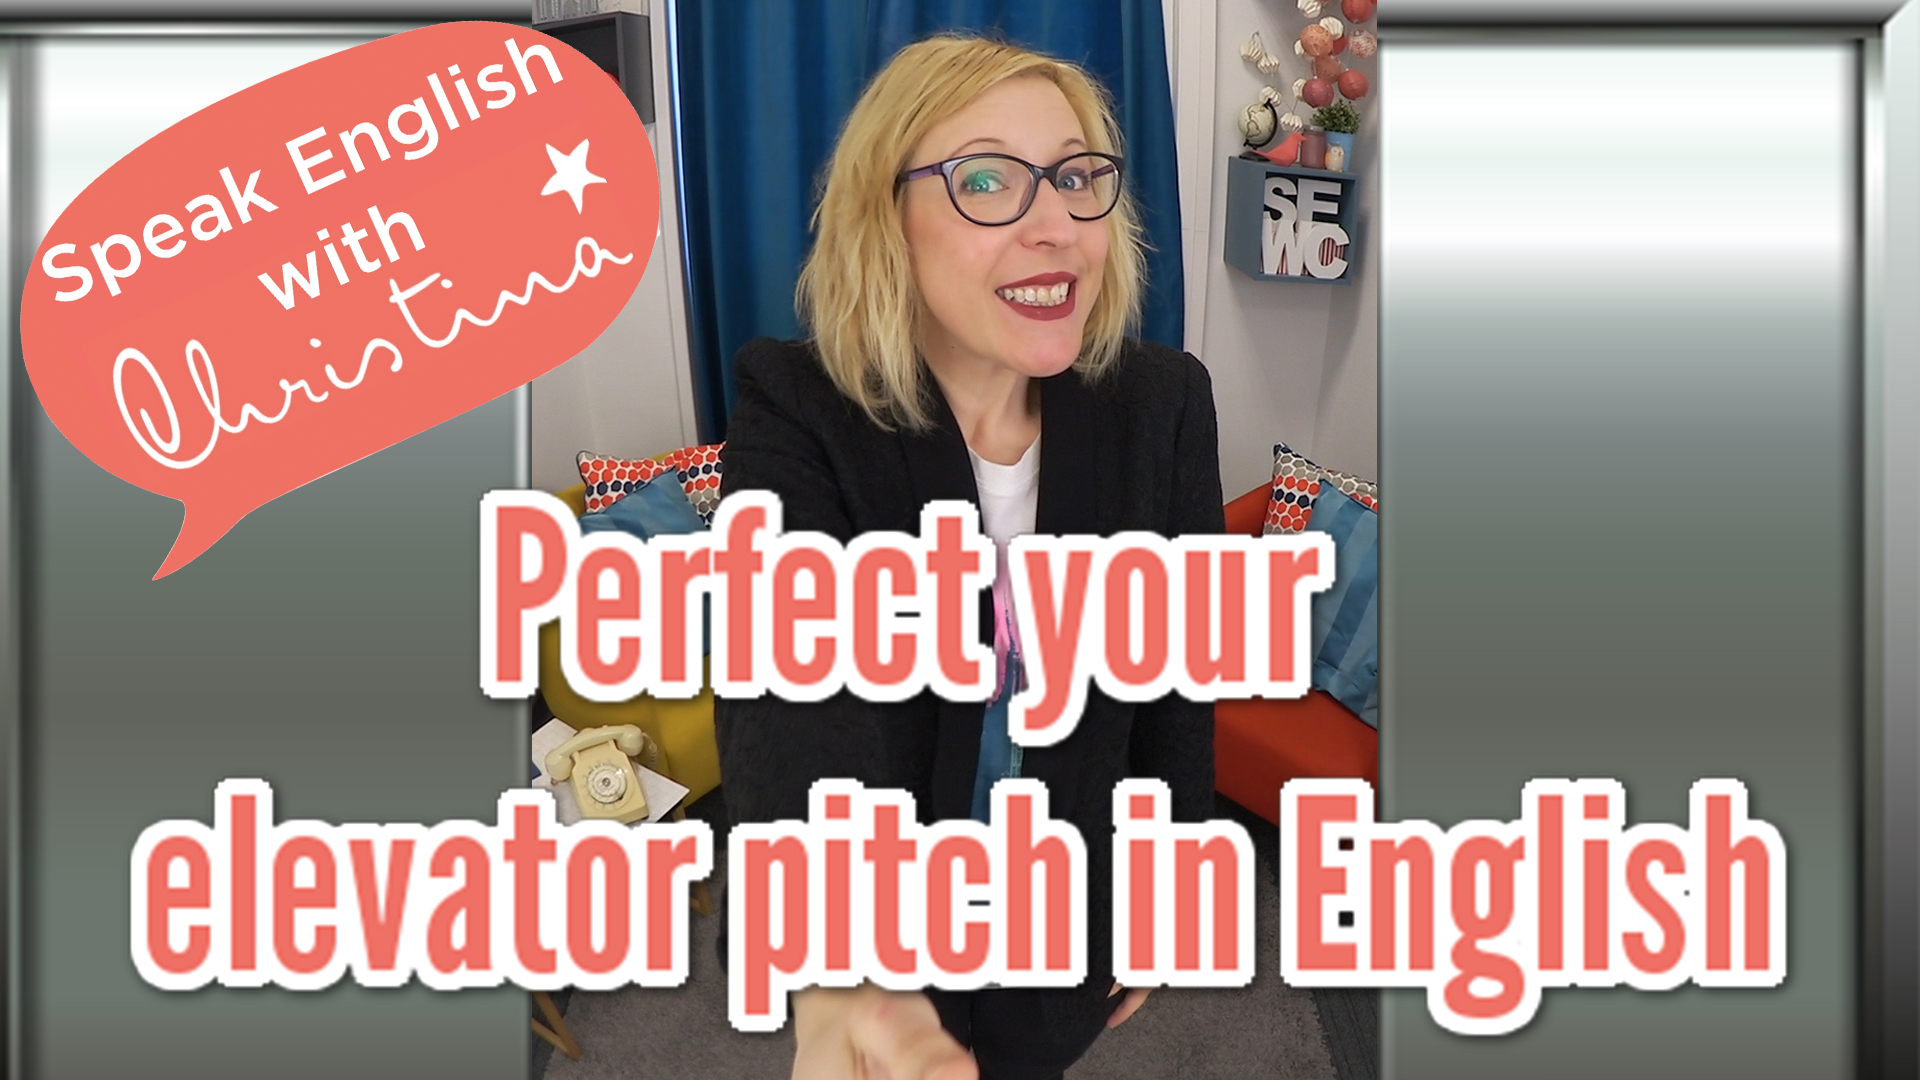 Elevator Pitch in Business English